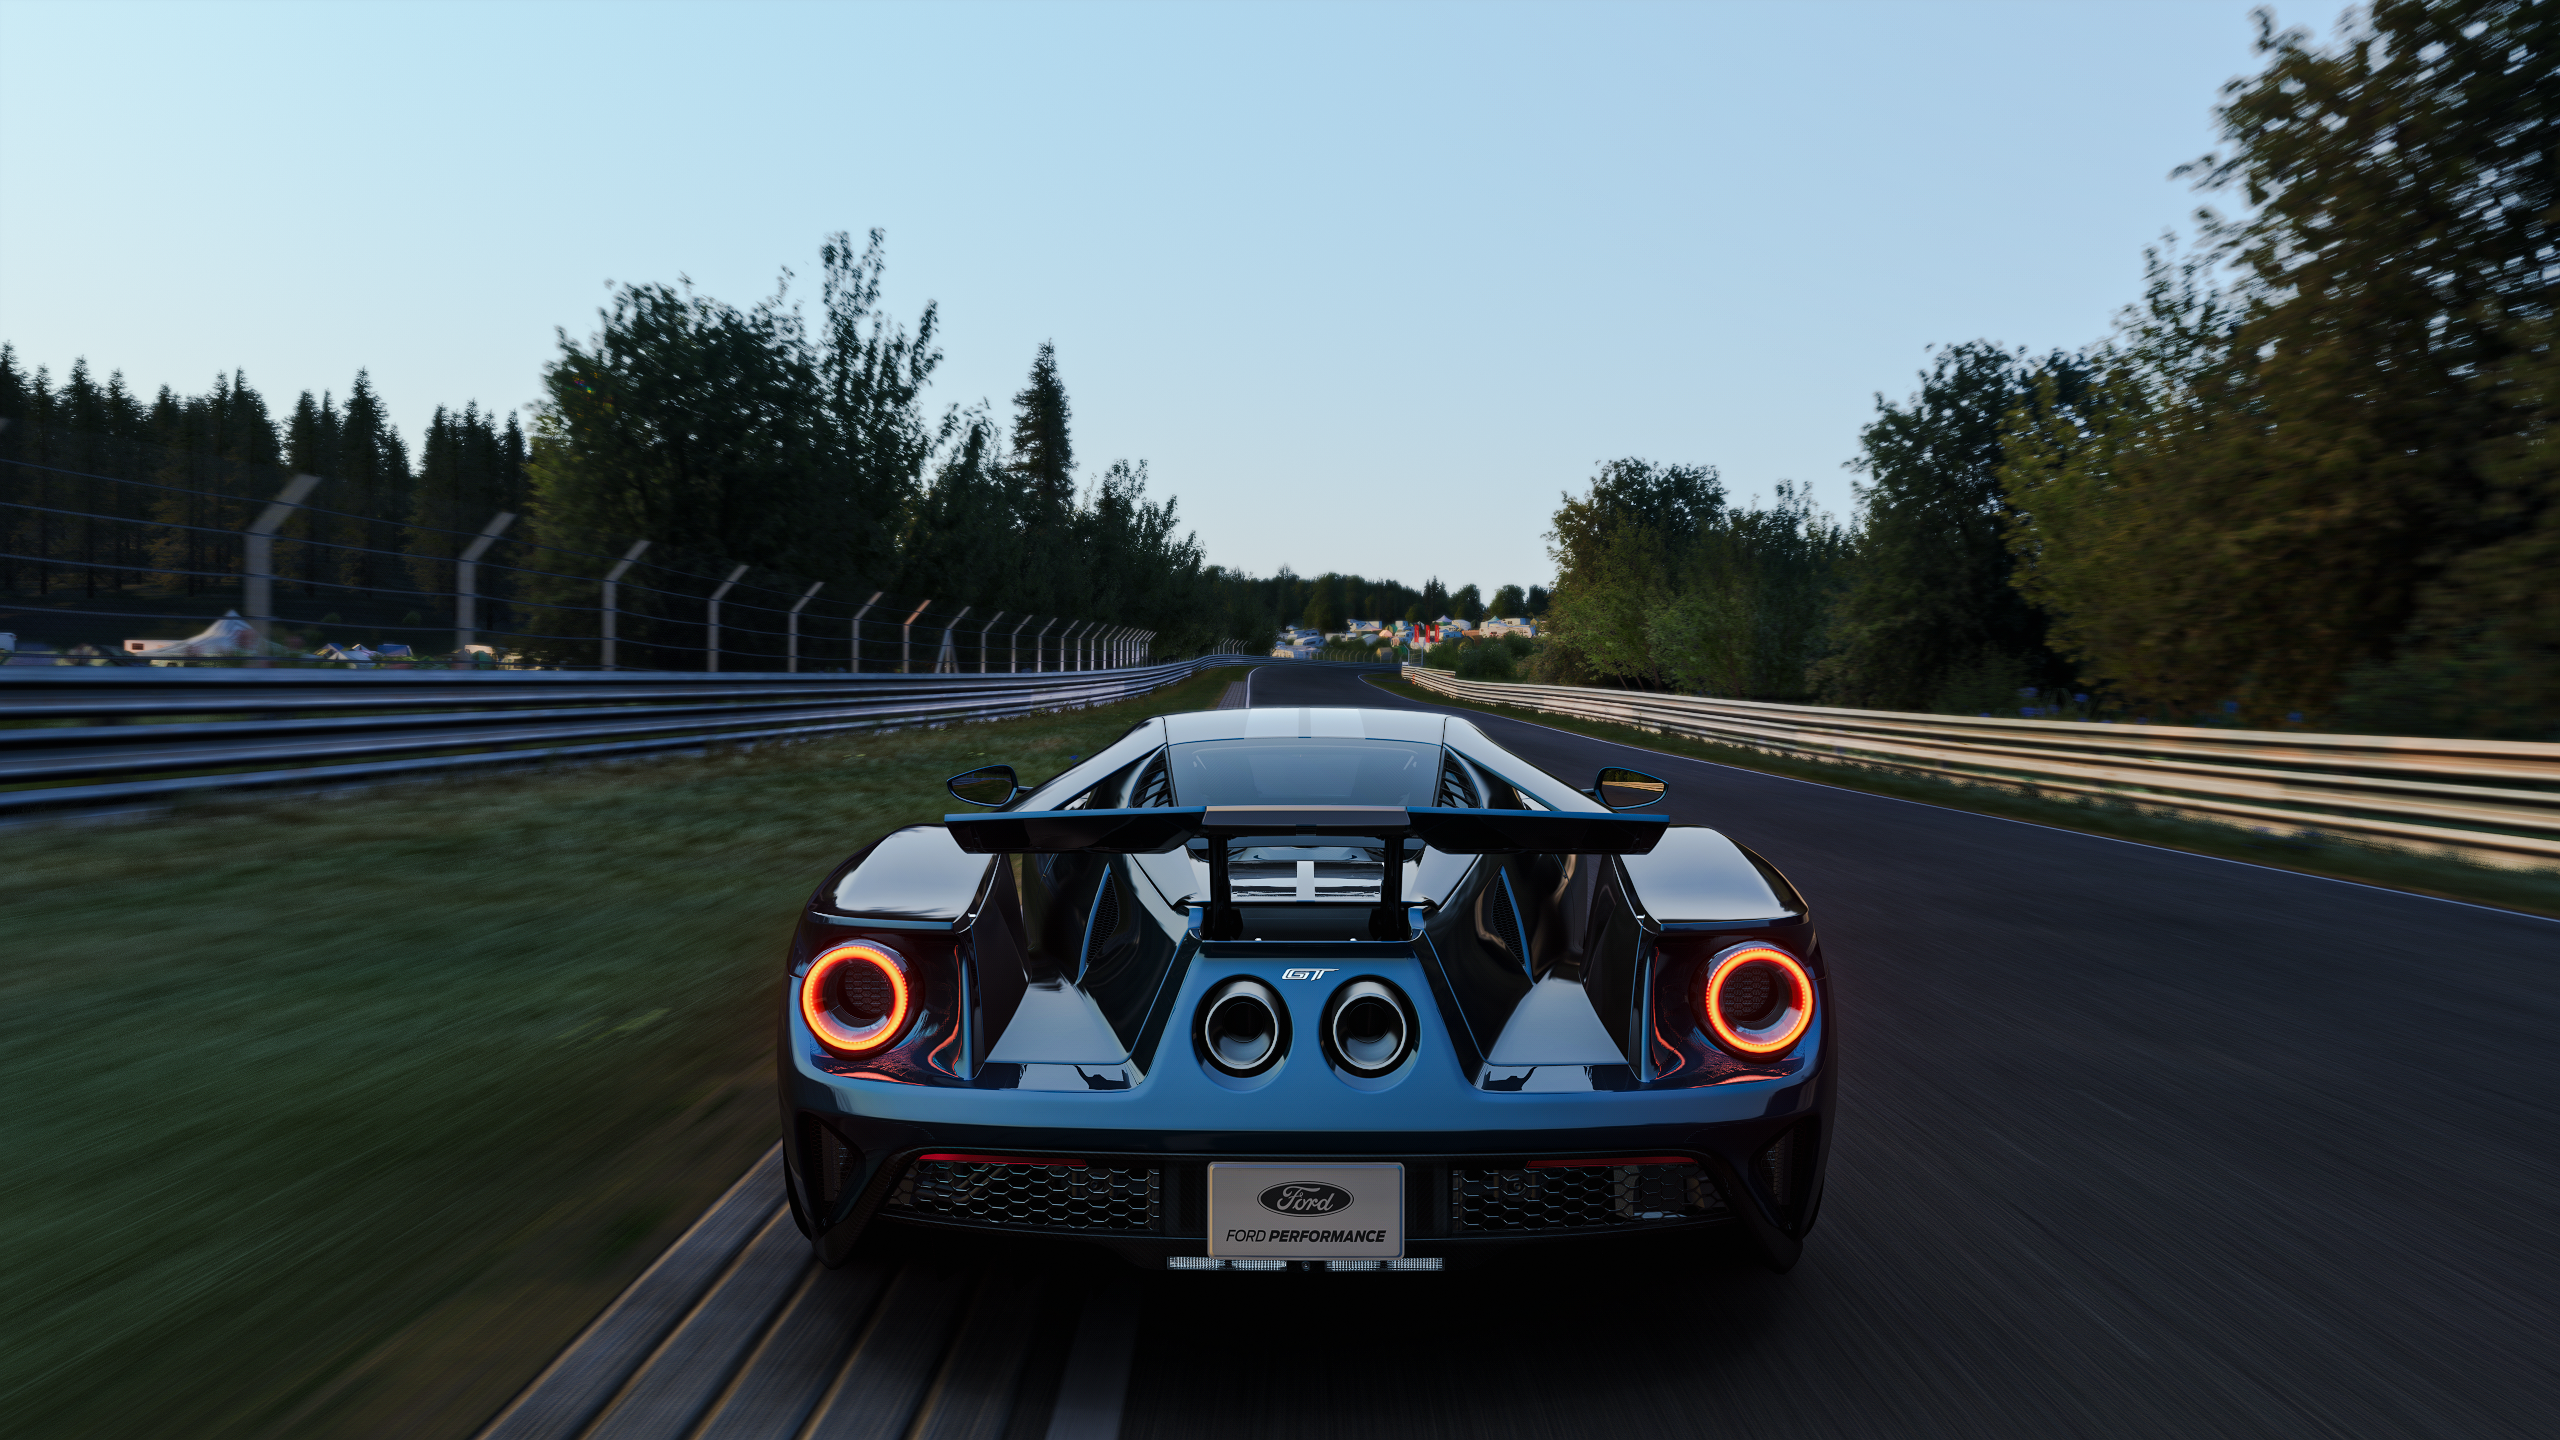 General 2560x1440 car vehicle Assetto Corsa Ford Ford GT Ford GT Mk II Nurburgring simulation rear view race tracks licence plates sky taillights video games American cars